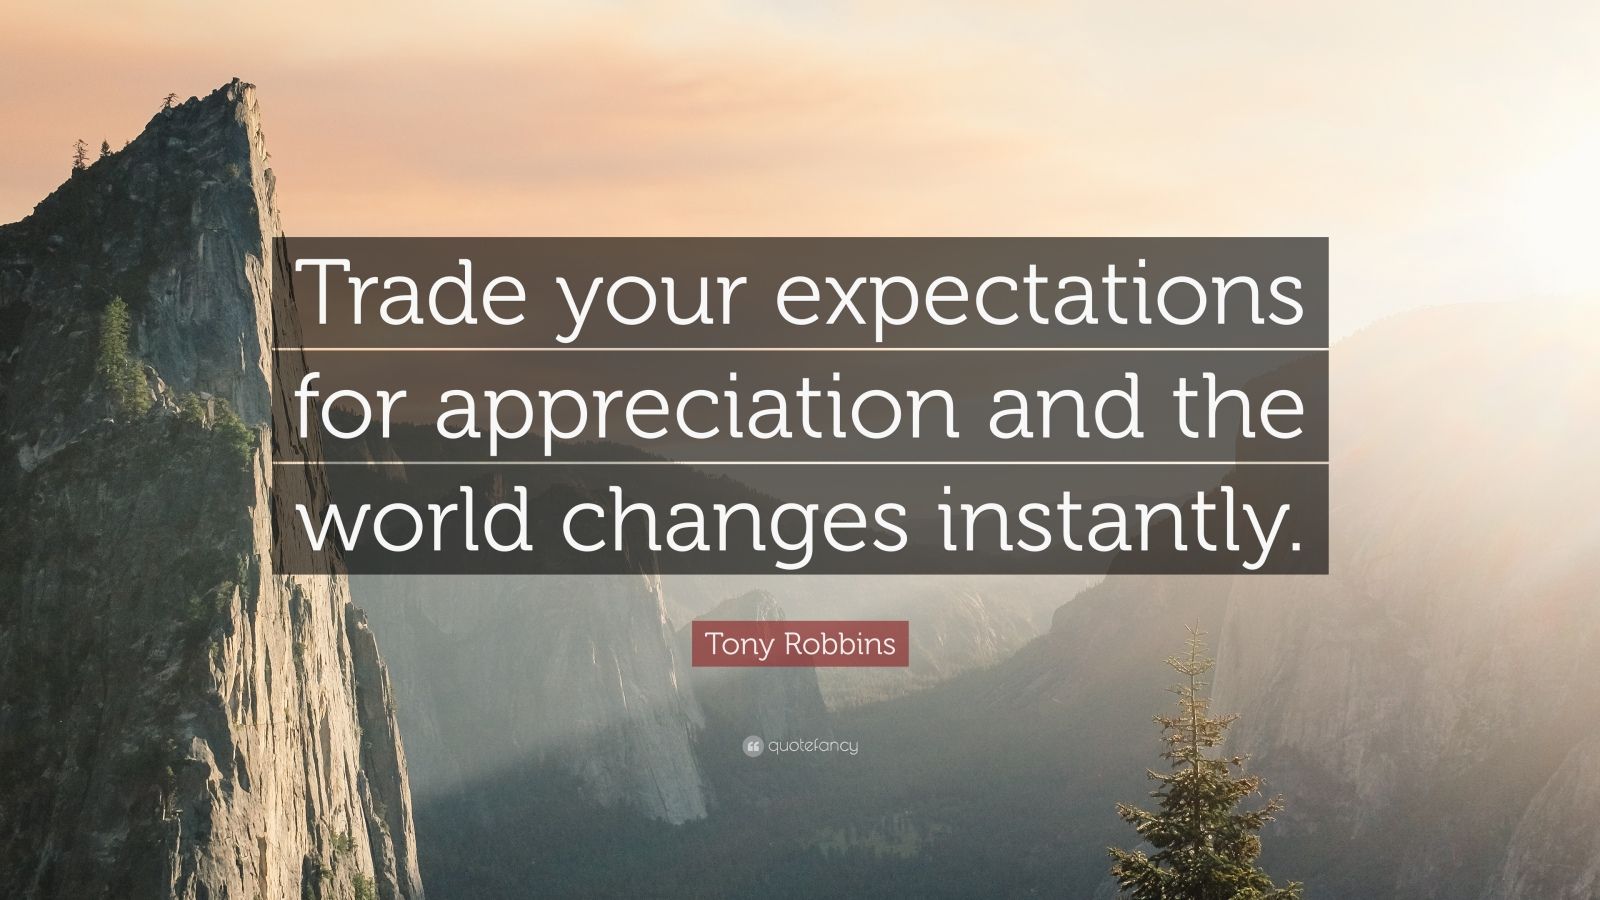 237804 Tony Robbins Quote Trade your expectations for appreciation and